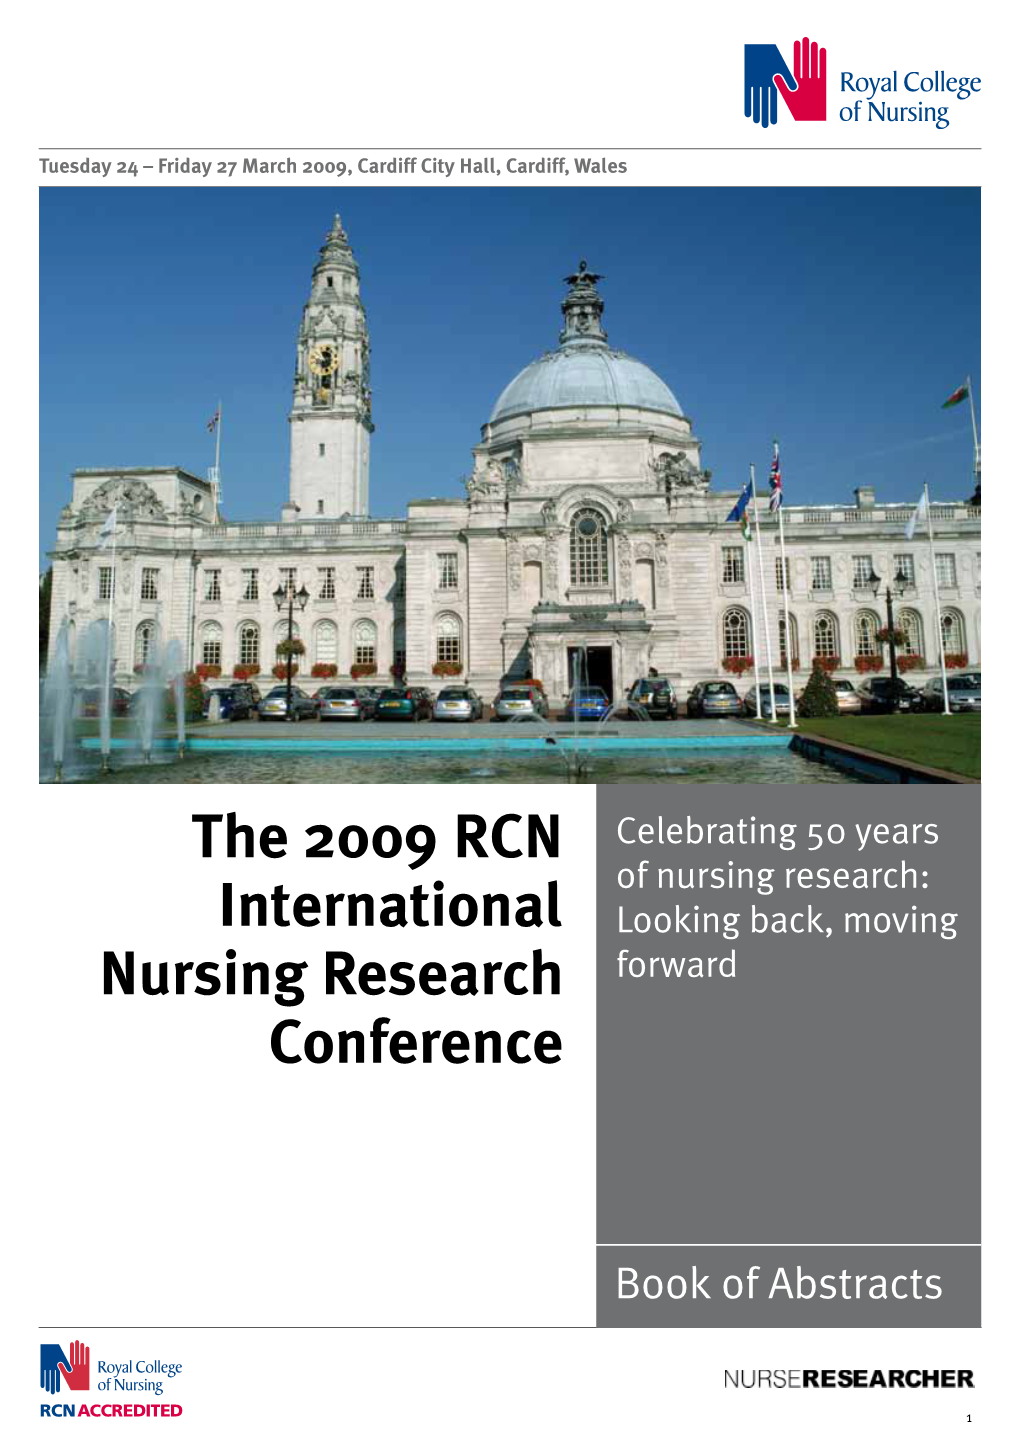 The 2009 RCN International Nursing Research Conference